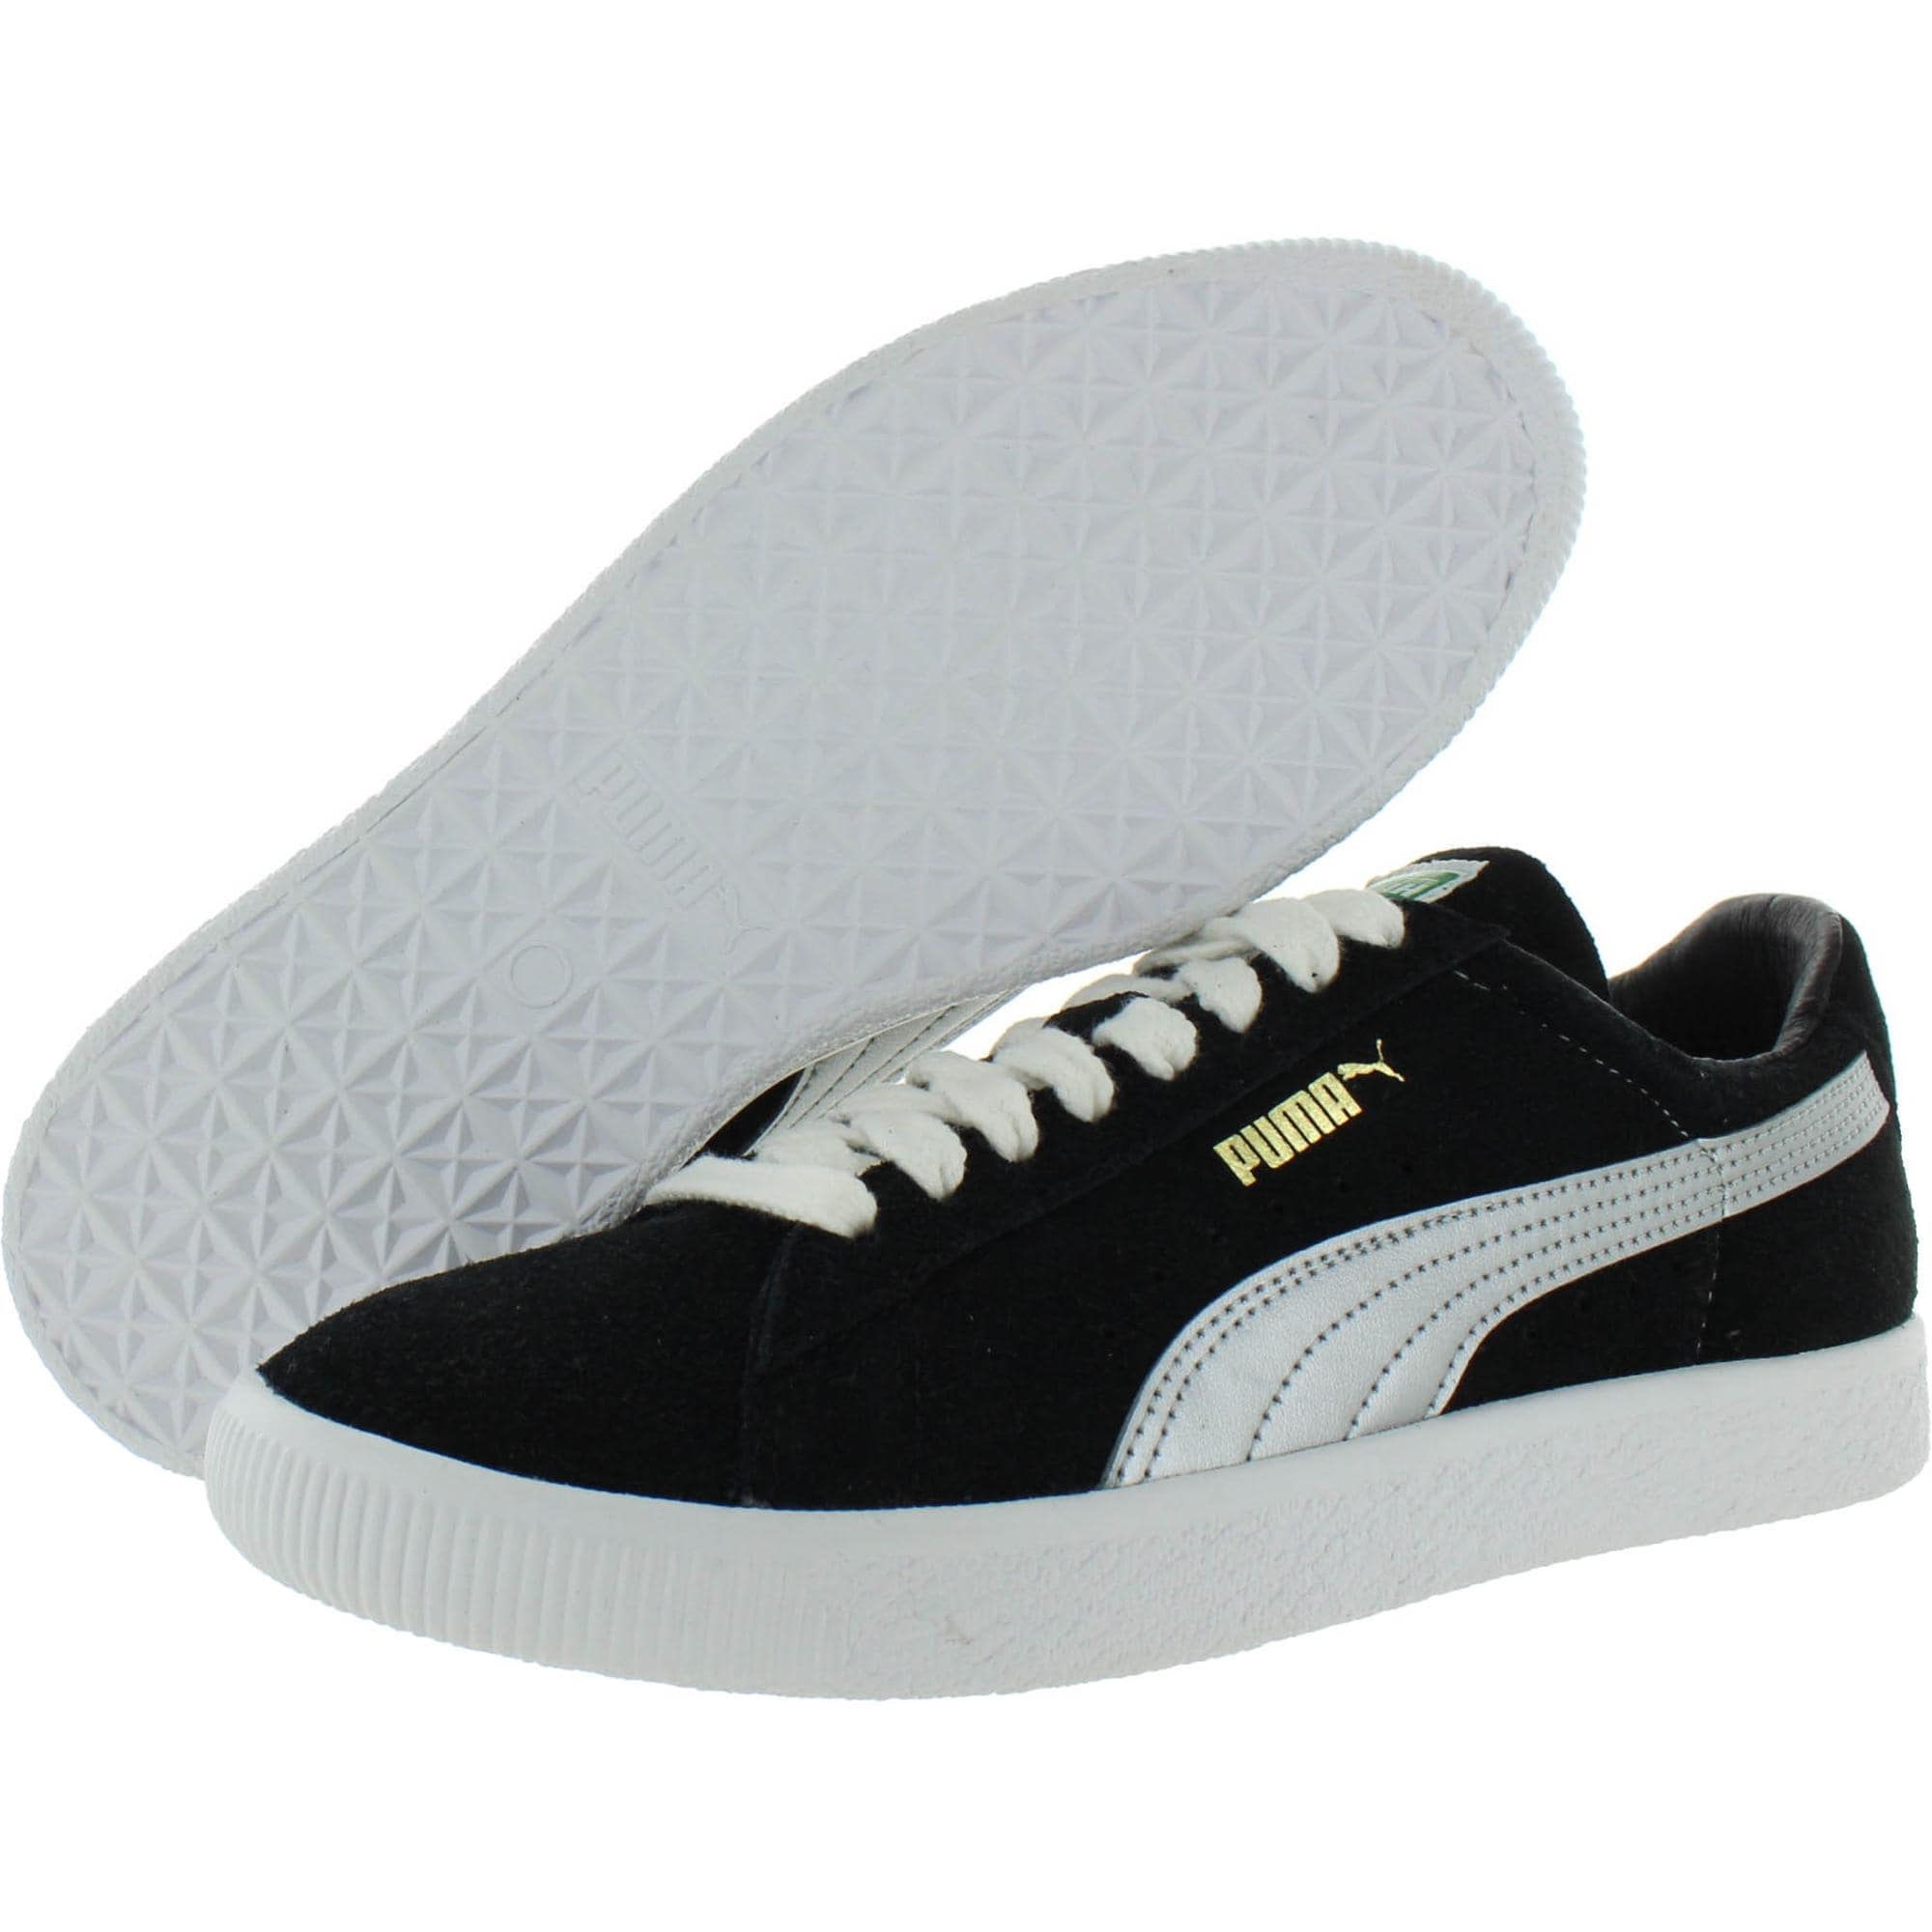 puma archive sneakers